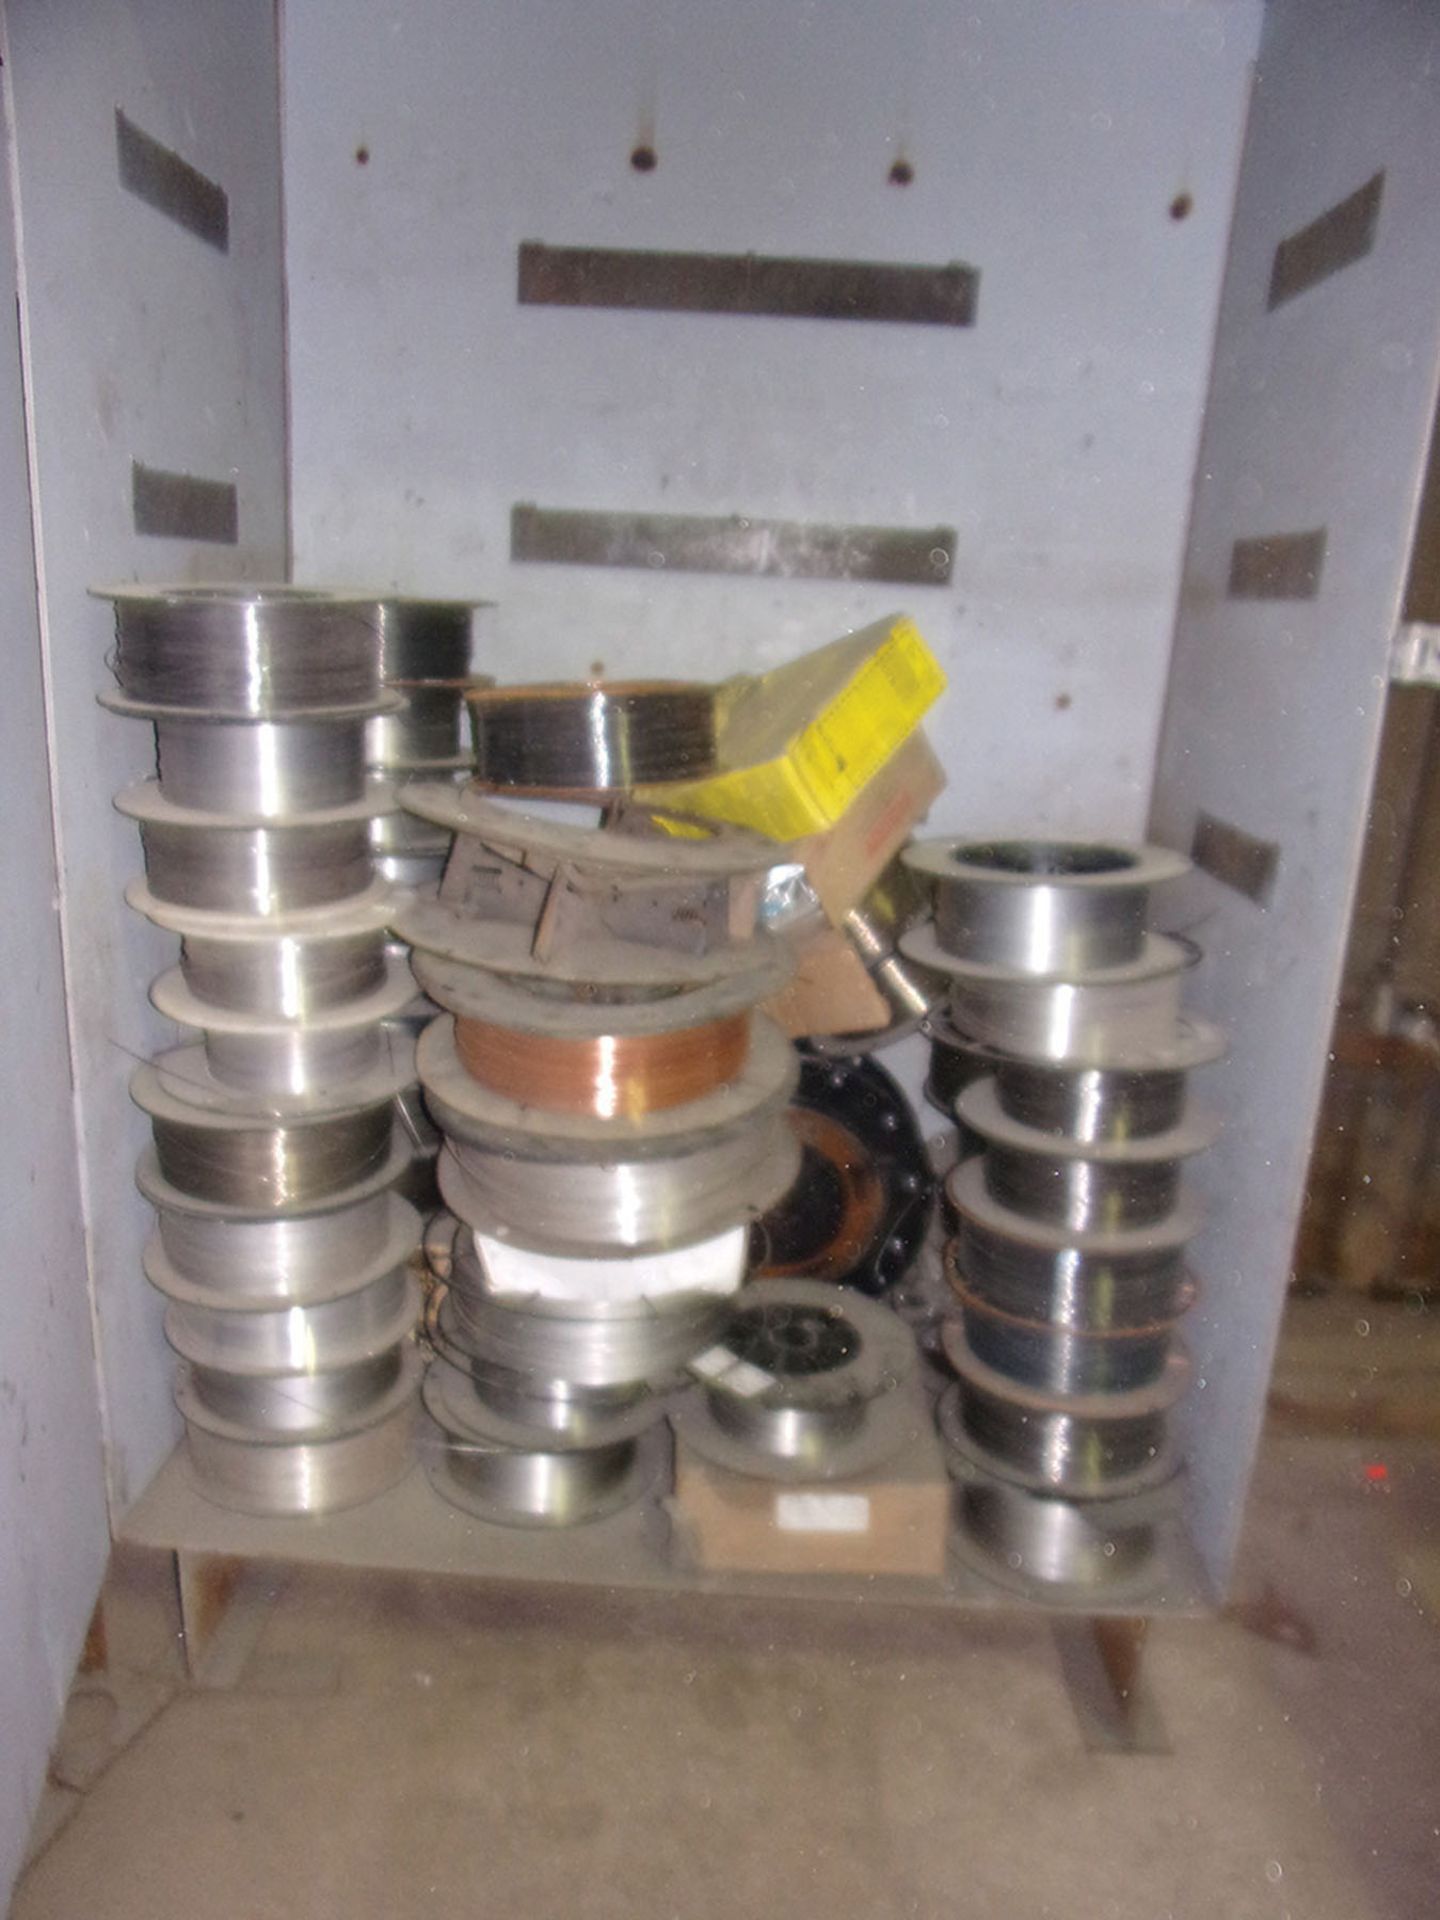 METAL CABINET WITH REEL WELDING WIRE